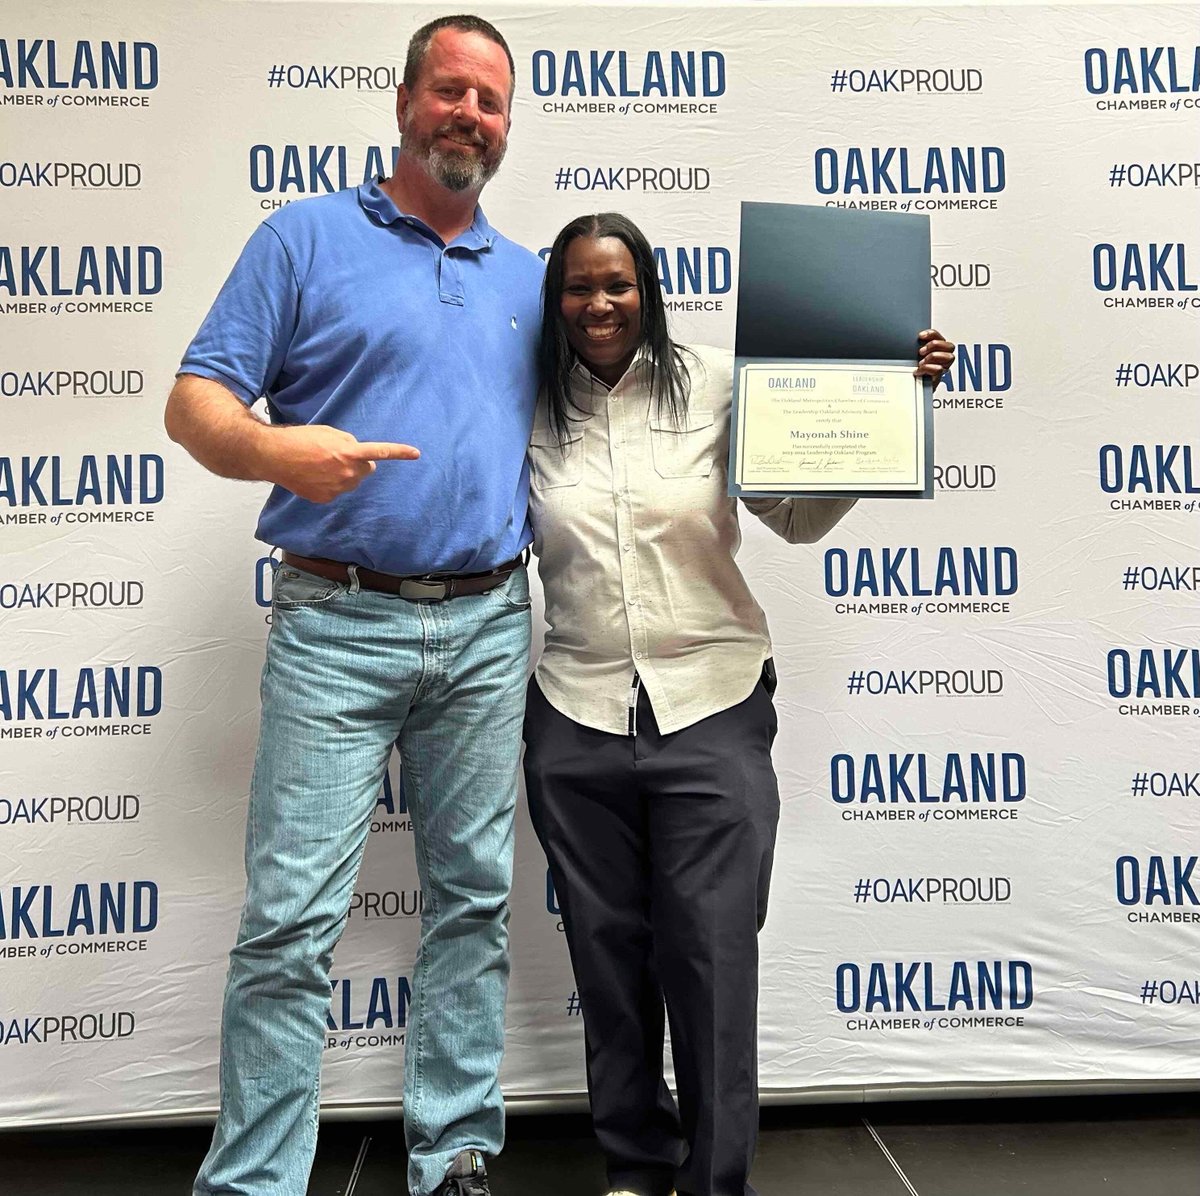 The City of Oakland and OakDOT are proud to congratulate Mayonah Shine, a supervisor in our traffic operations - roadway markings unit, now a 2024 graduate of the Oakland Chamber of Commerce Leadership Oakland program. Thank you for your service and leadership! #OakDOT #OakHero